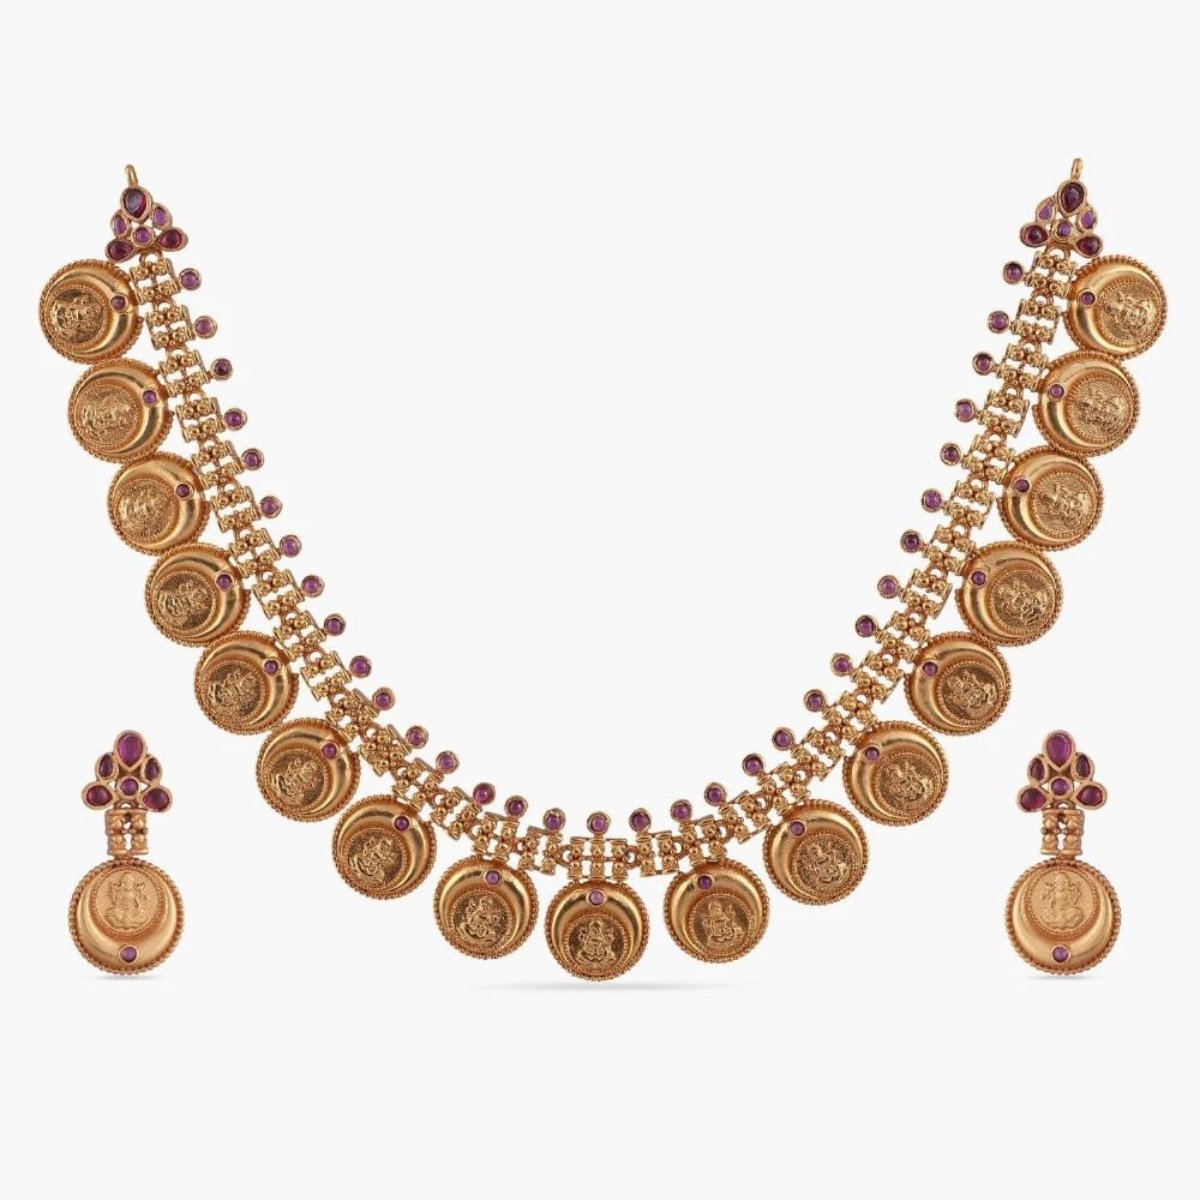 A picture of an Indian artificial gold plated necklace set with a round pendant and matching earrings, featuring intricate filigree work and red gemstones.